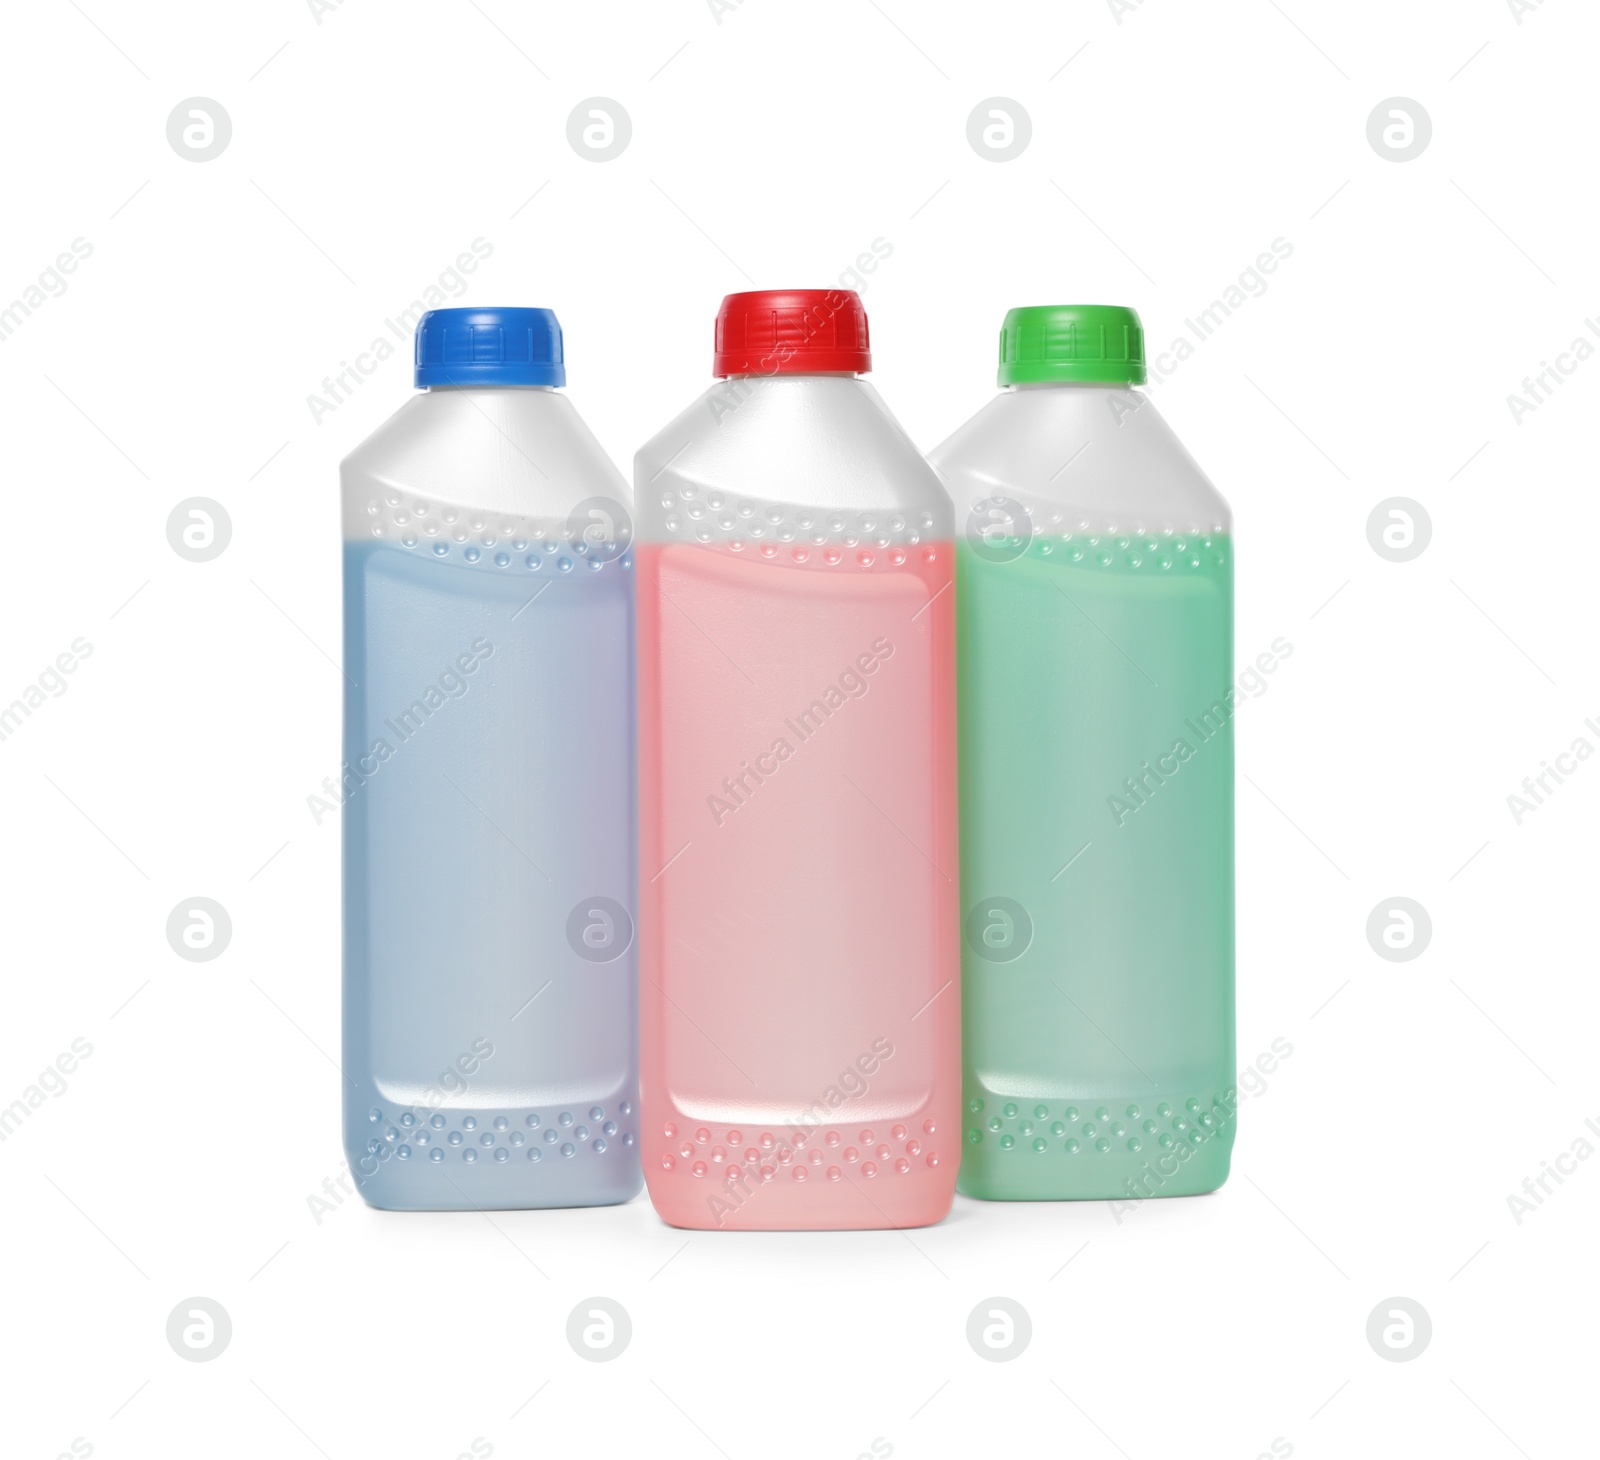 Photo of Antifreeze in plastic bottles isolated on white